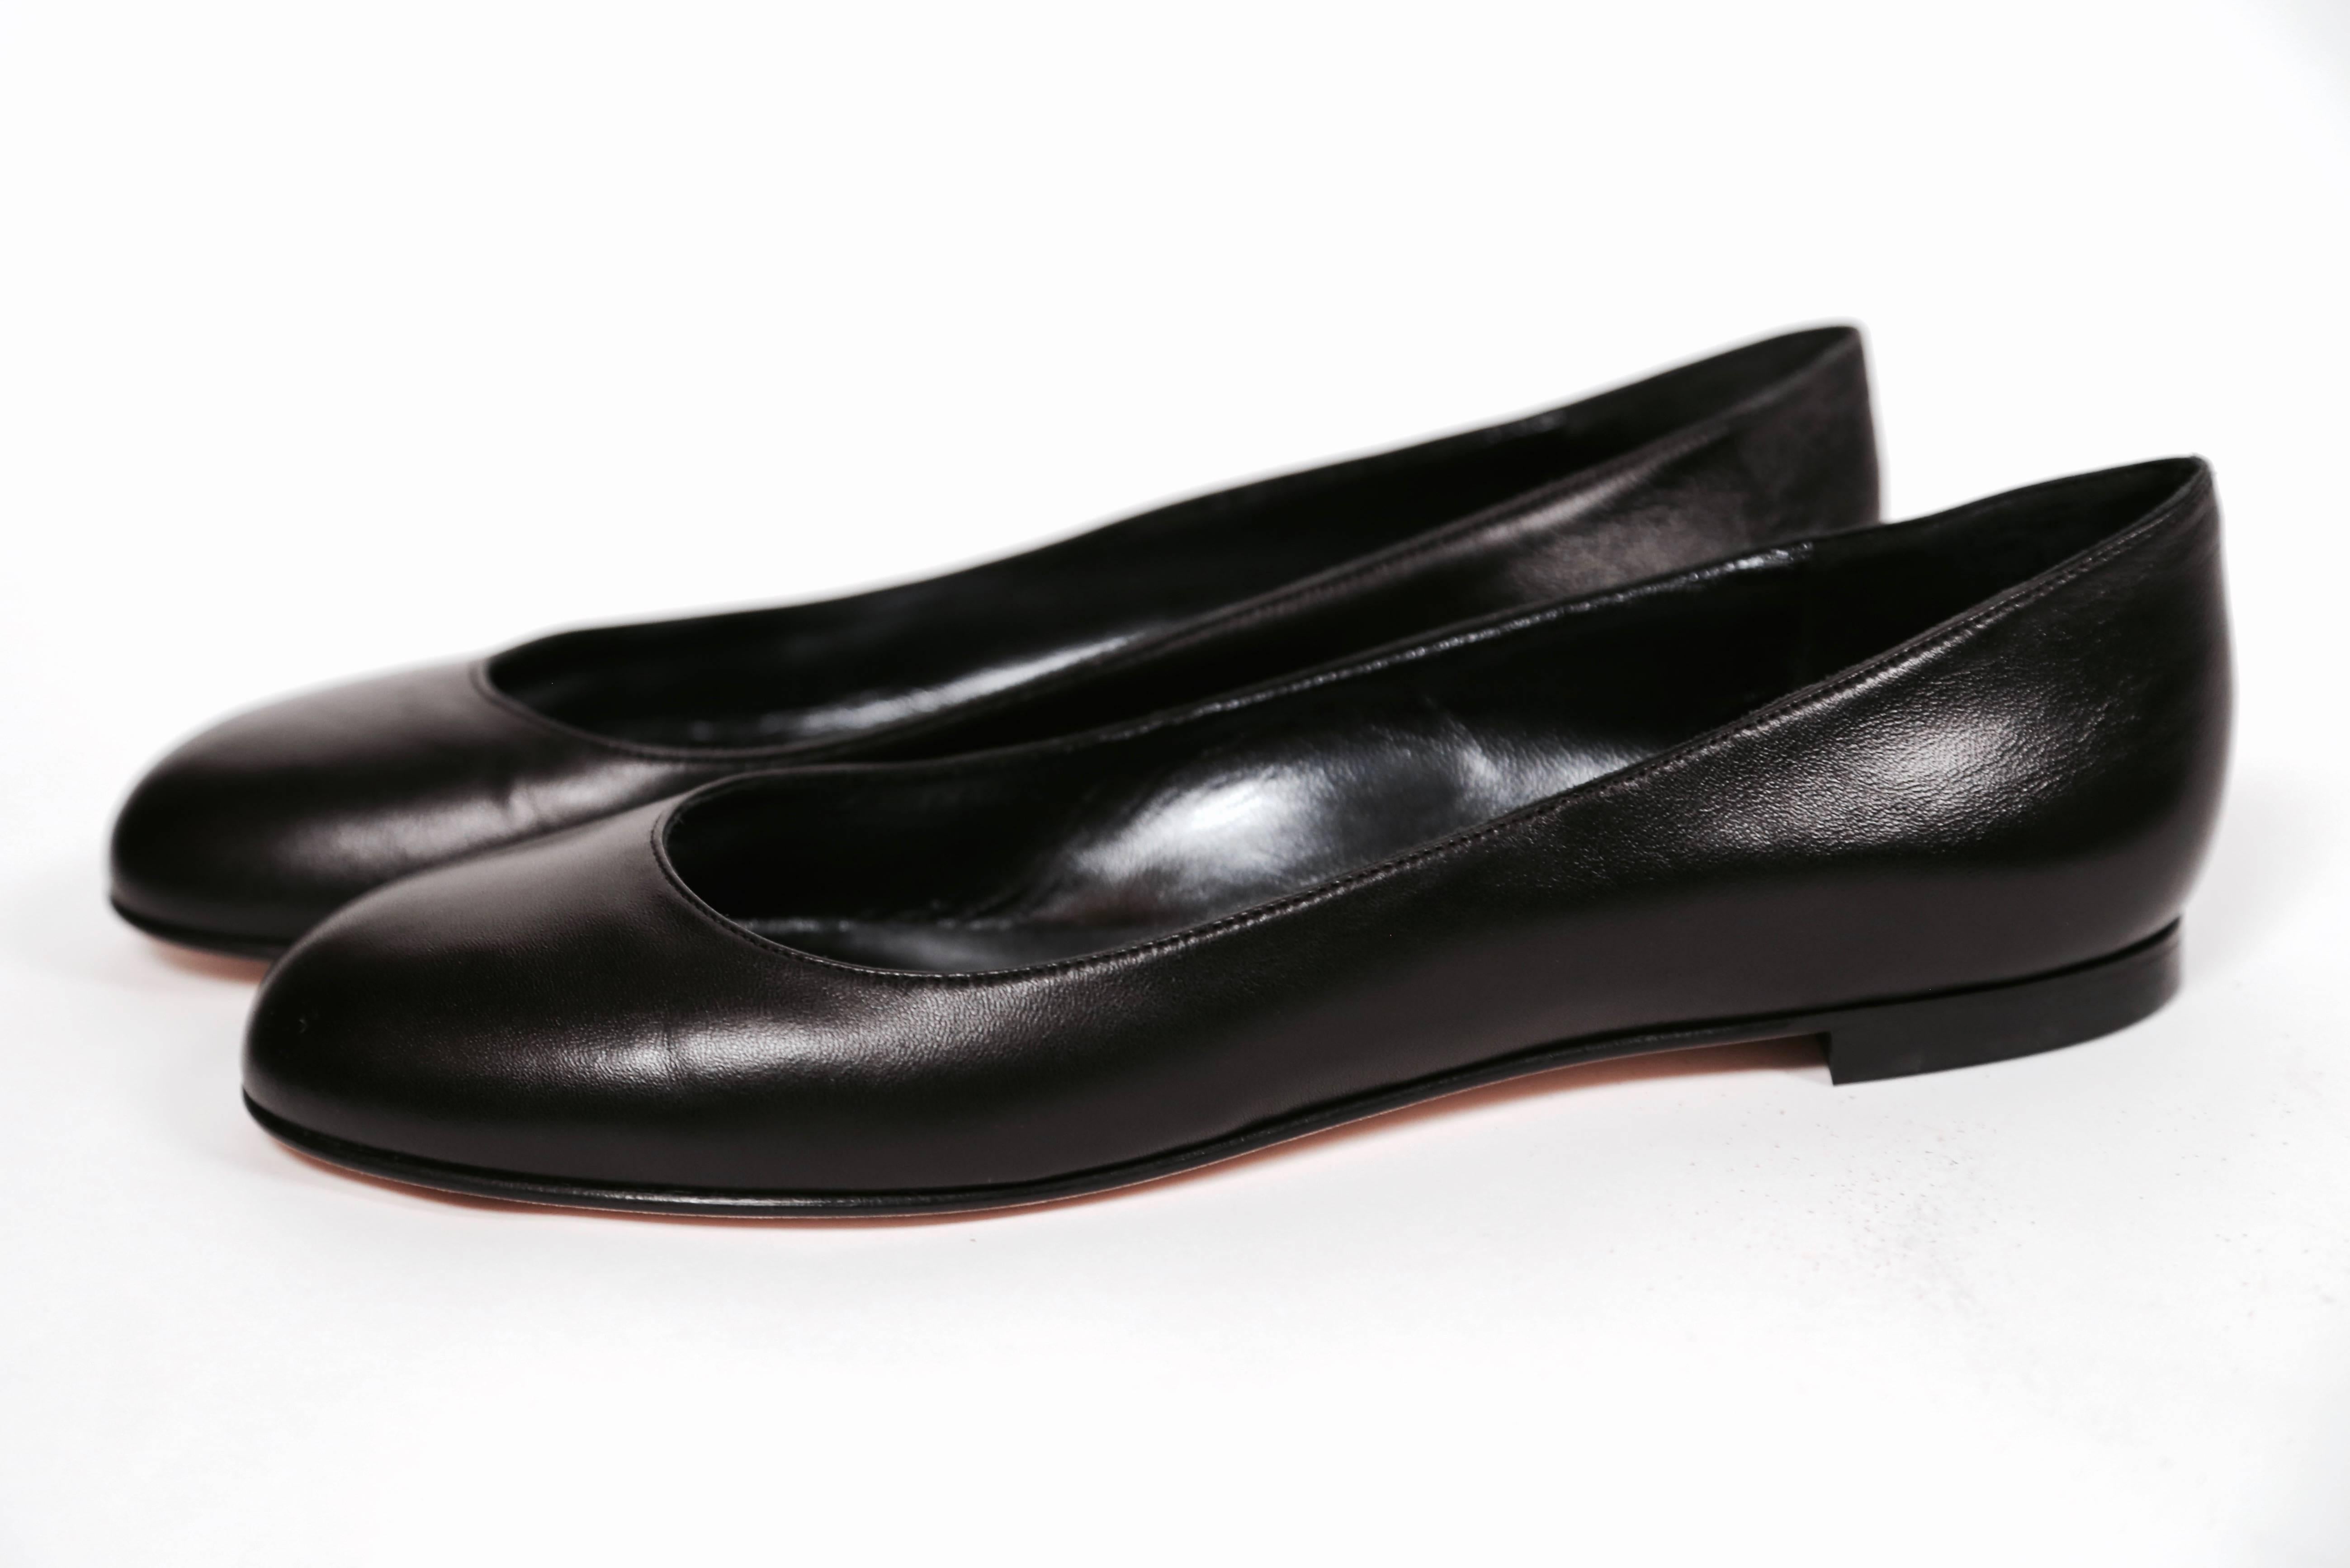 Unworn classic black ballet flats from Manolo Blahnik dating to the early 2000's. Shoes are labeled a size 40.5 which best fits a U.S. 9.5. Insoles measure approximately: 10.33